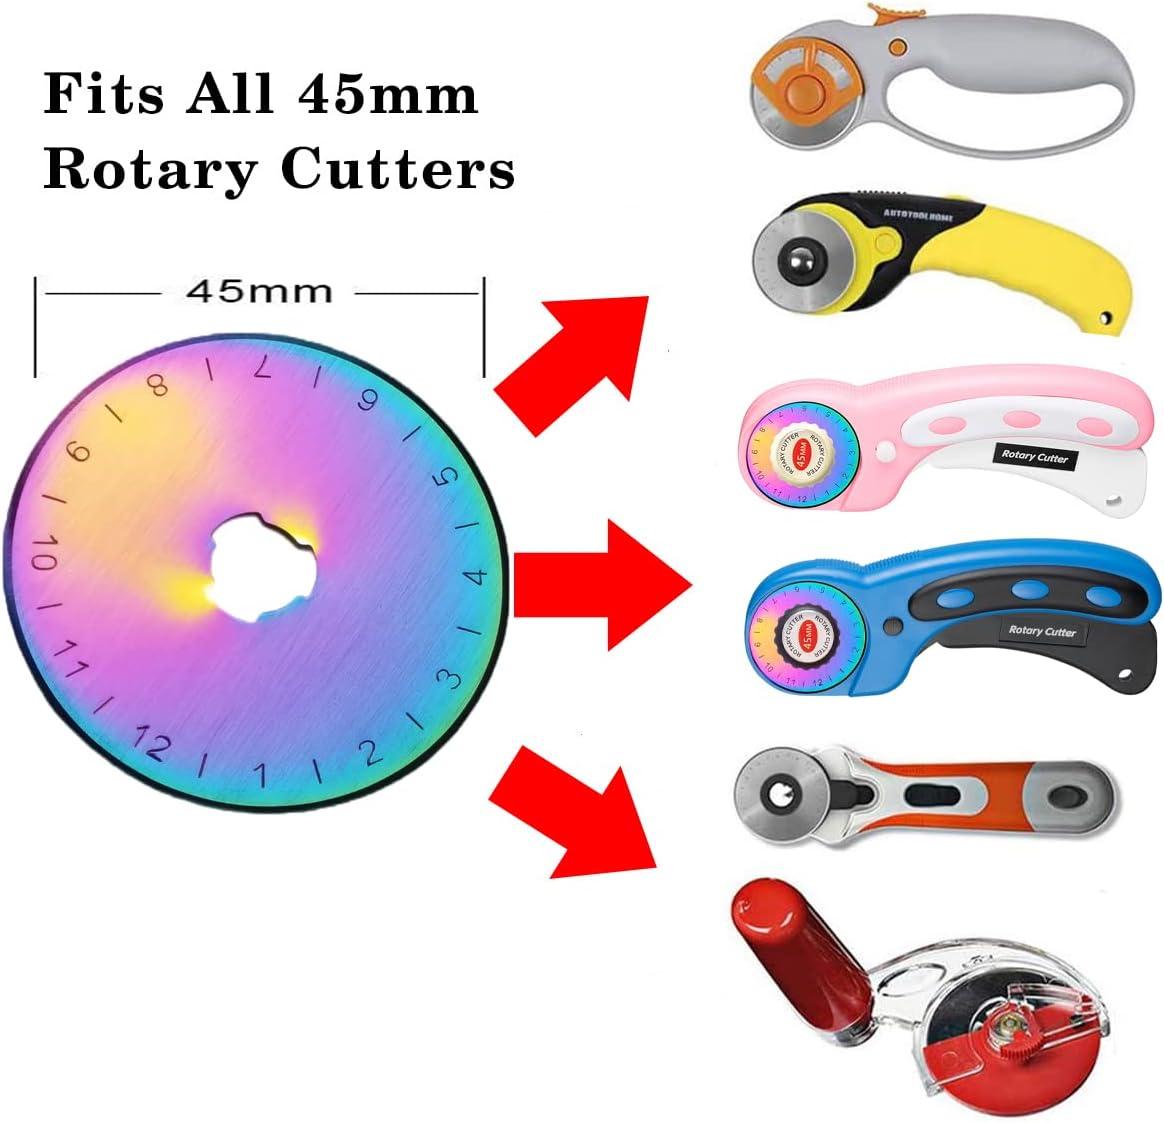 Rotary Blade Sharpener for 28mm & 45mm Blades + 5 x 45mm Blades